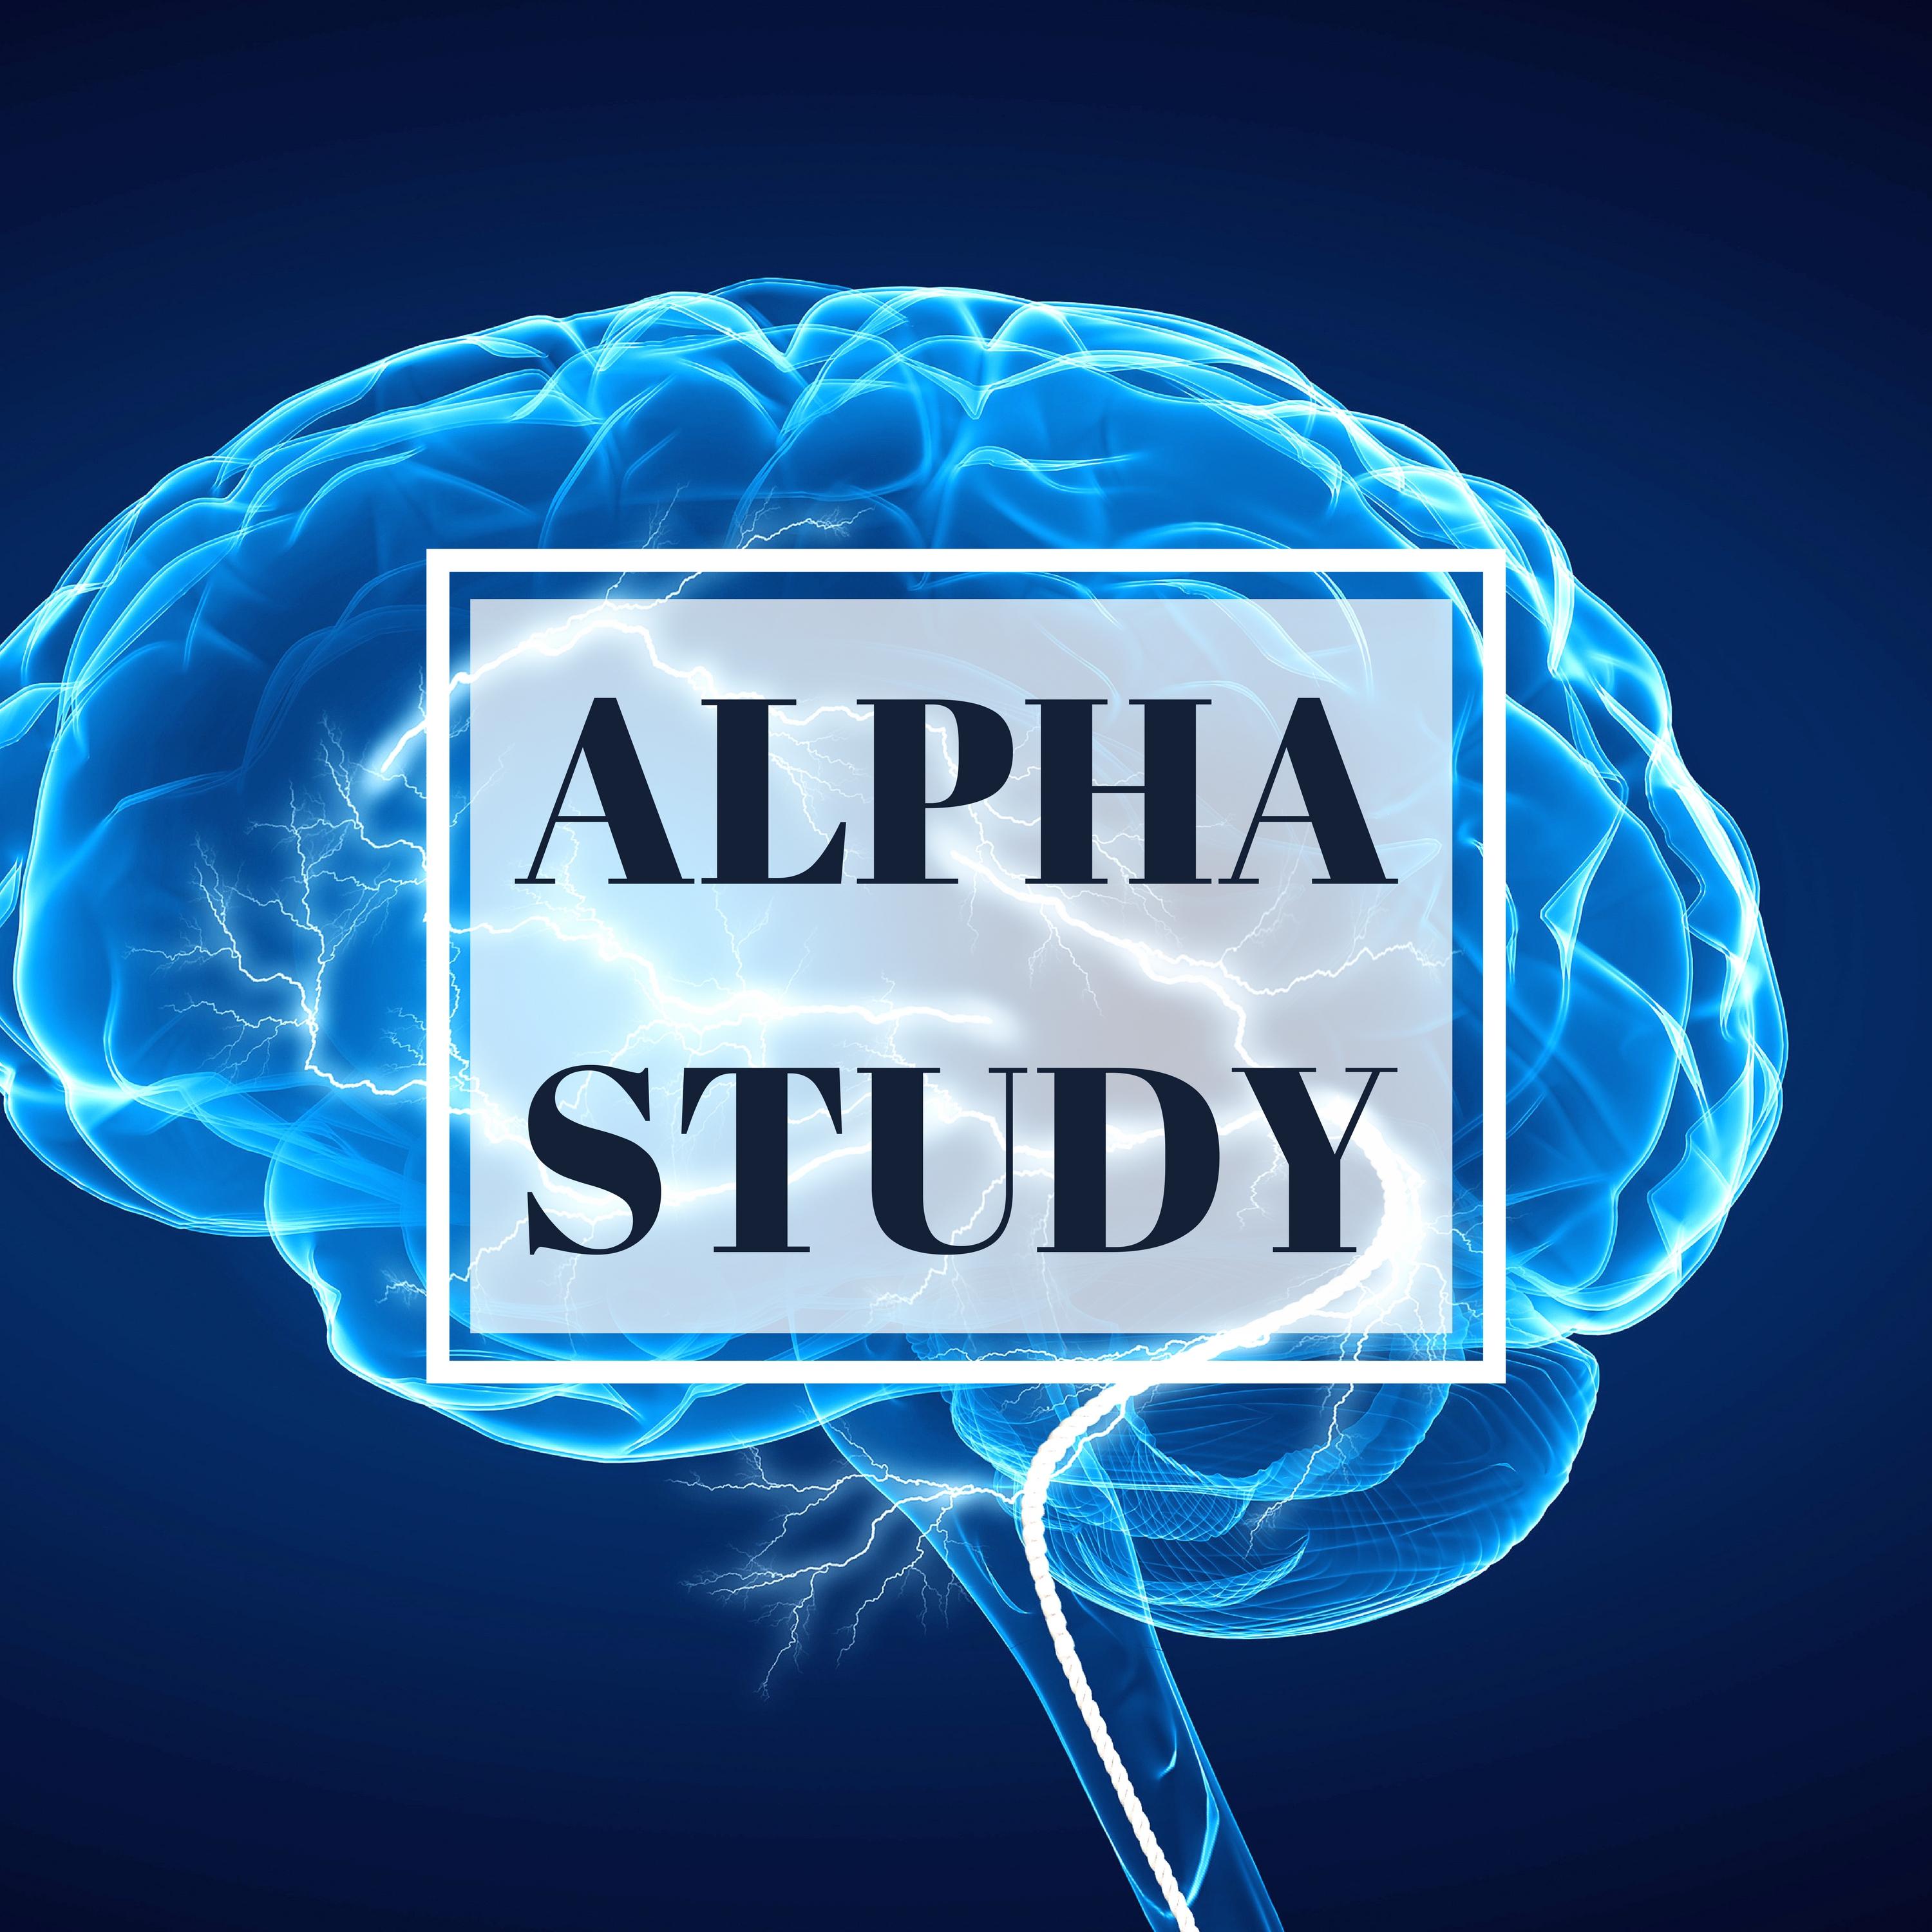 Alpha Study - Increase IQ & Creativity, Relaxing Studying Music for Brain Power & Focus Concentration